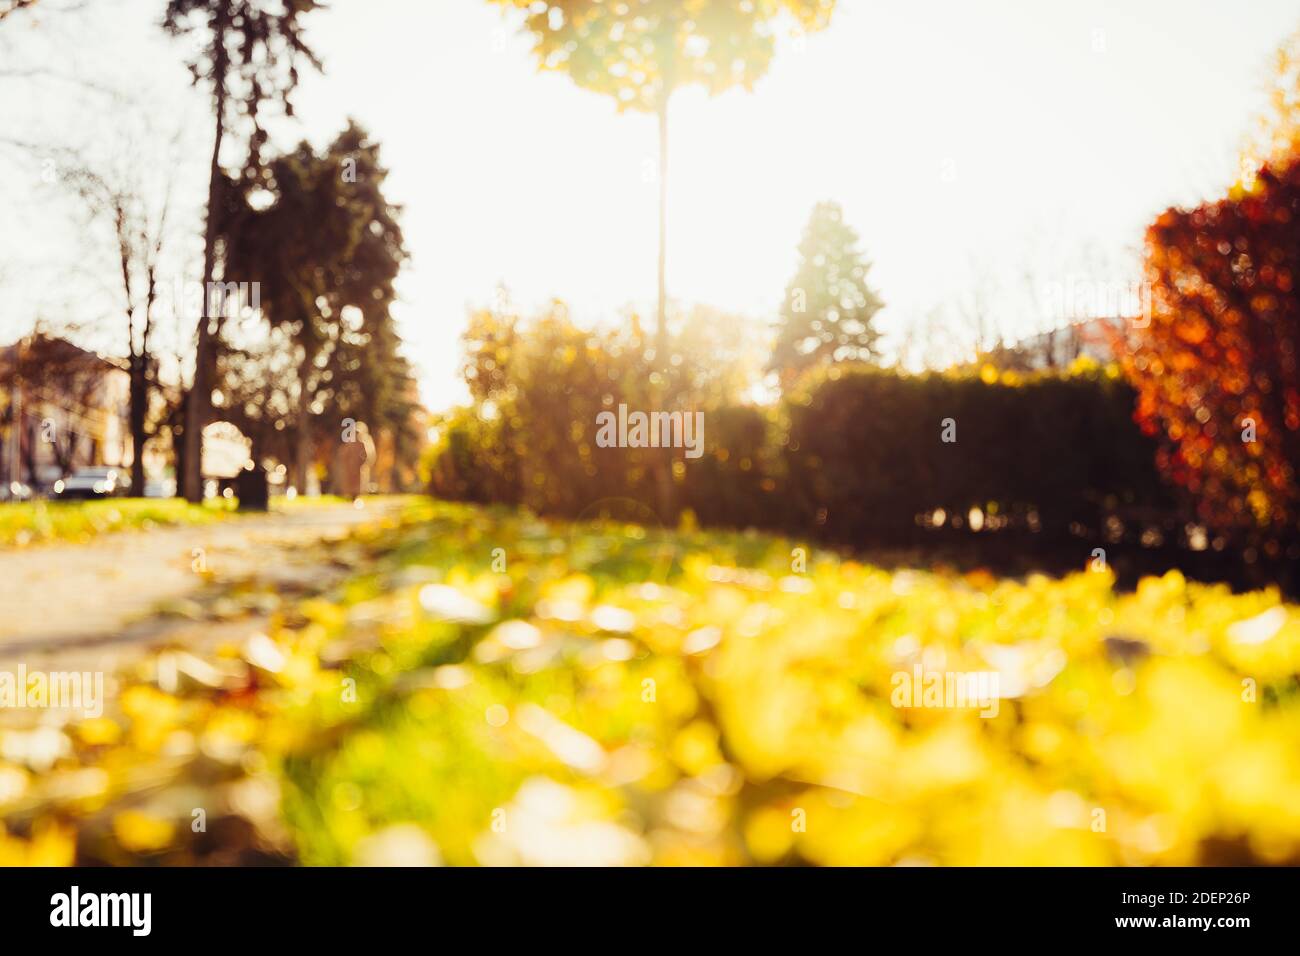 Autumn sunny alley in the leaves, through the trees the sun breaks through. Beautiful autumn landscape with yellow trees and sun. Colorful foliage in Stock Photo